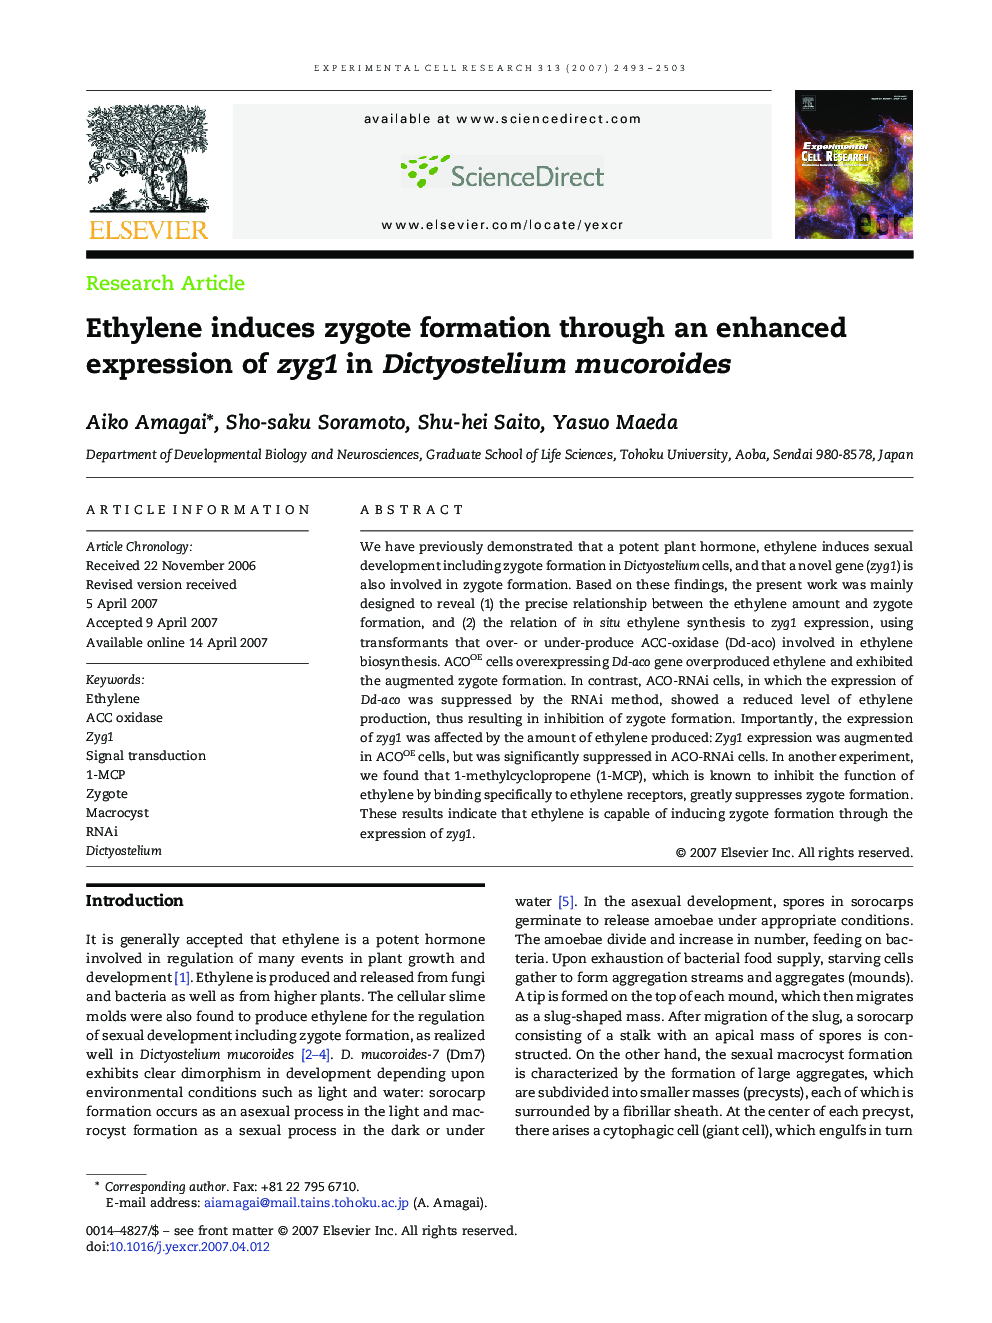 Ethylene induces zygote formation through an enhanced expression of zyg1 in Dictyostelium mucoroides